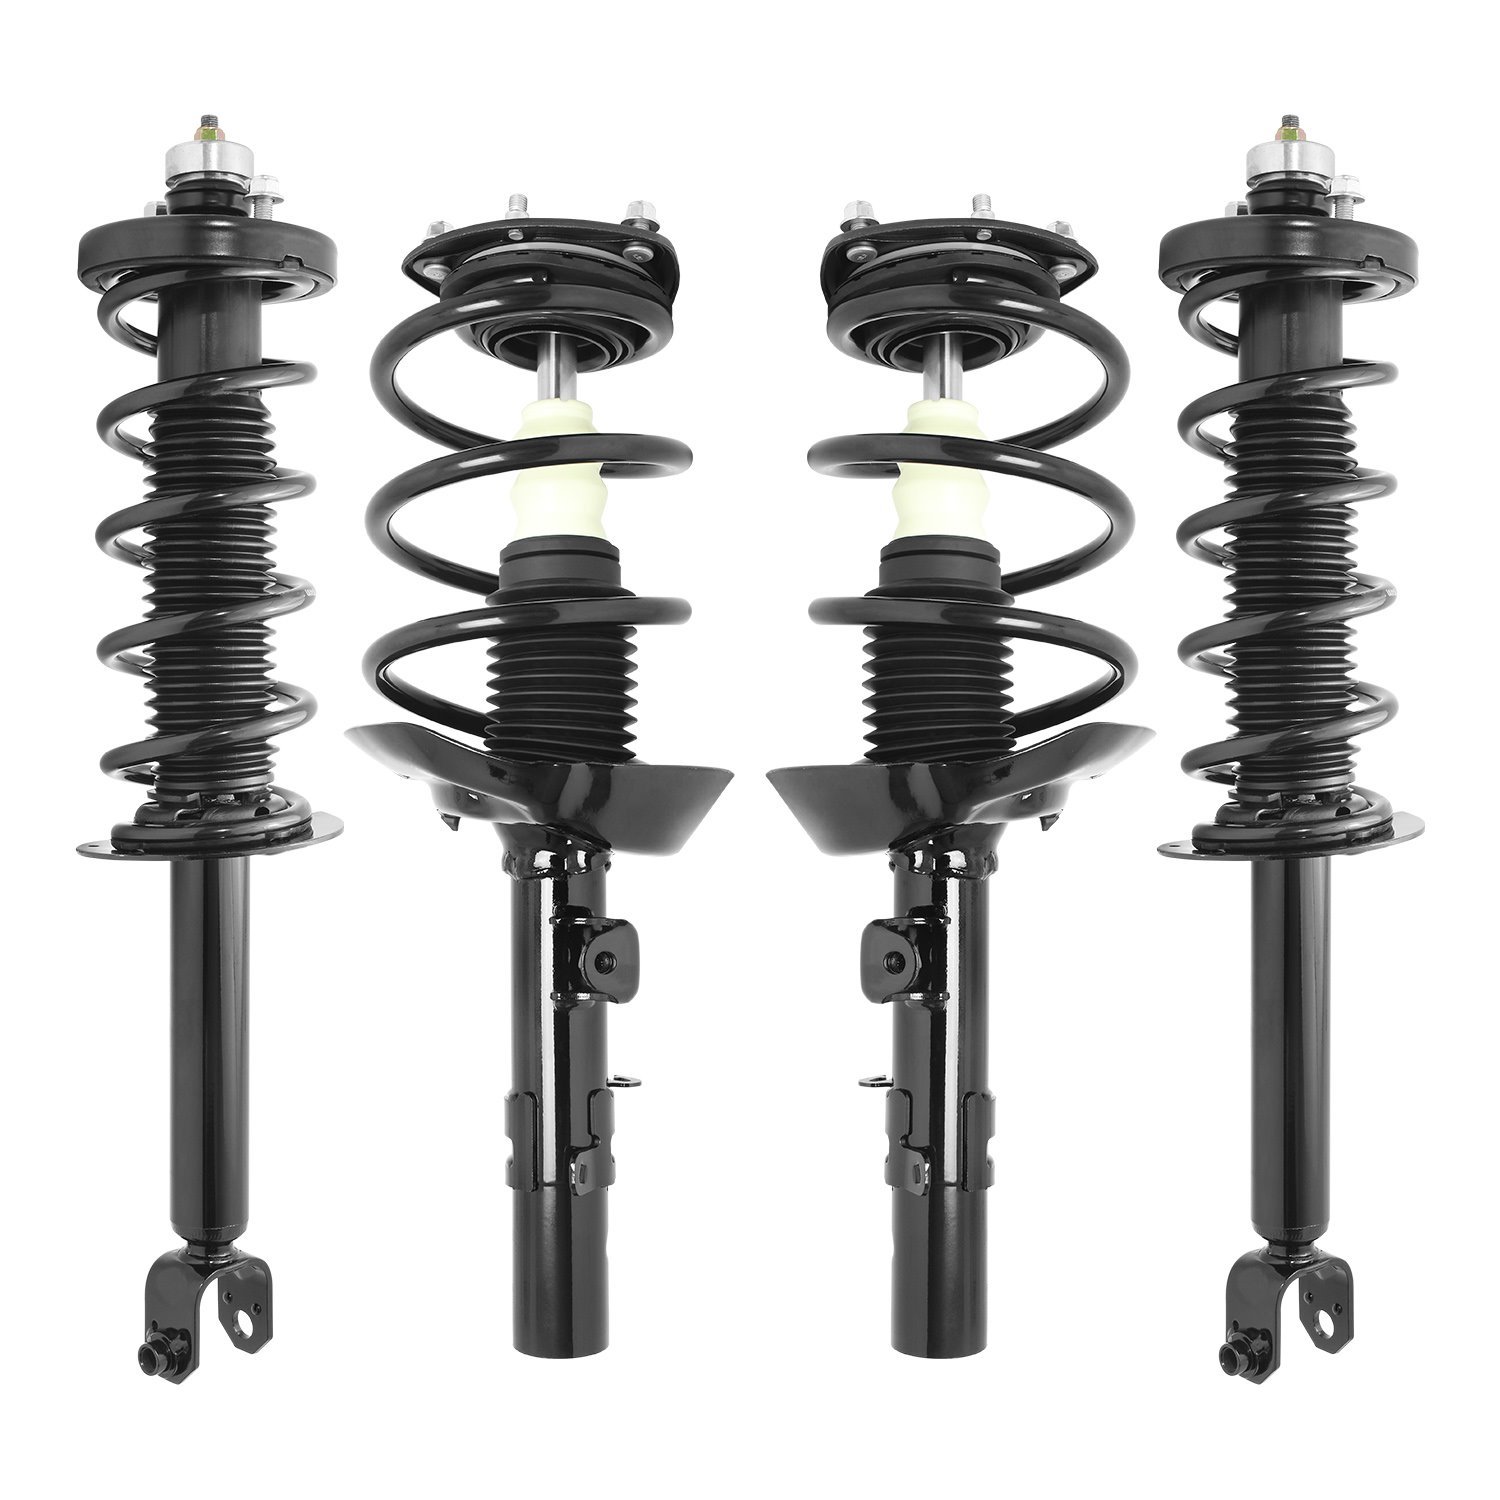 4-11217-15960-001 Front & Rear Suspension Strut & Coil Spring Assembly Kit Fits Select Honda Accord